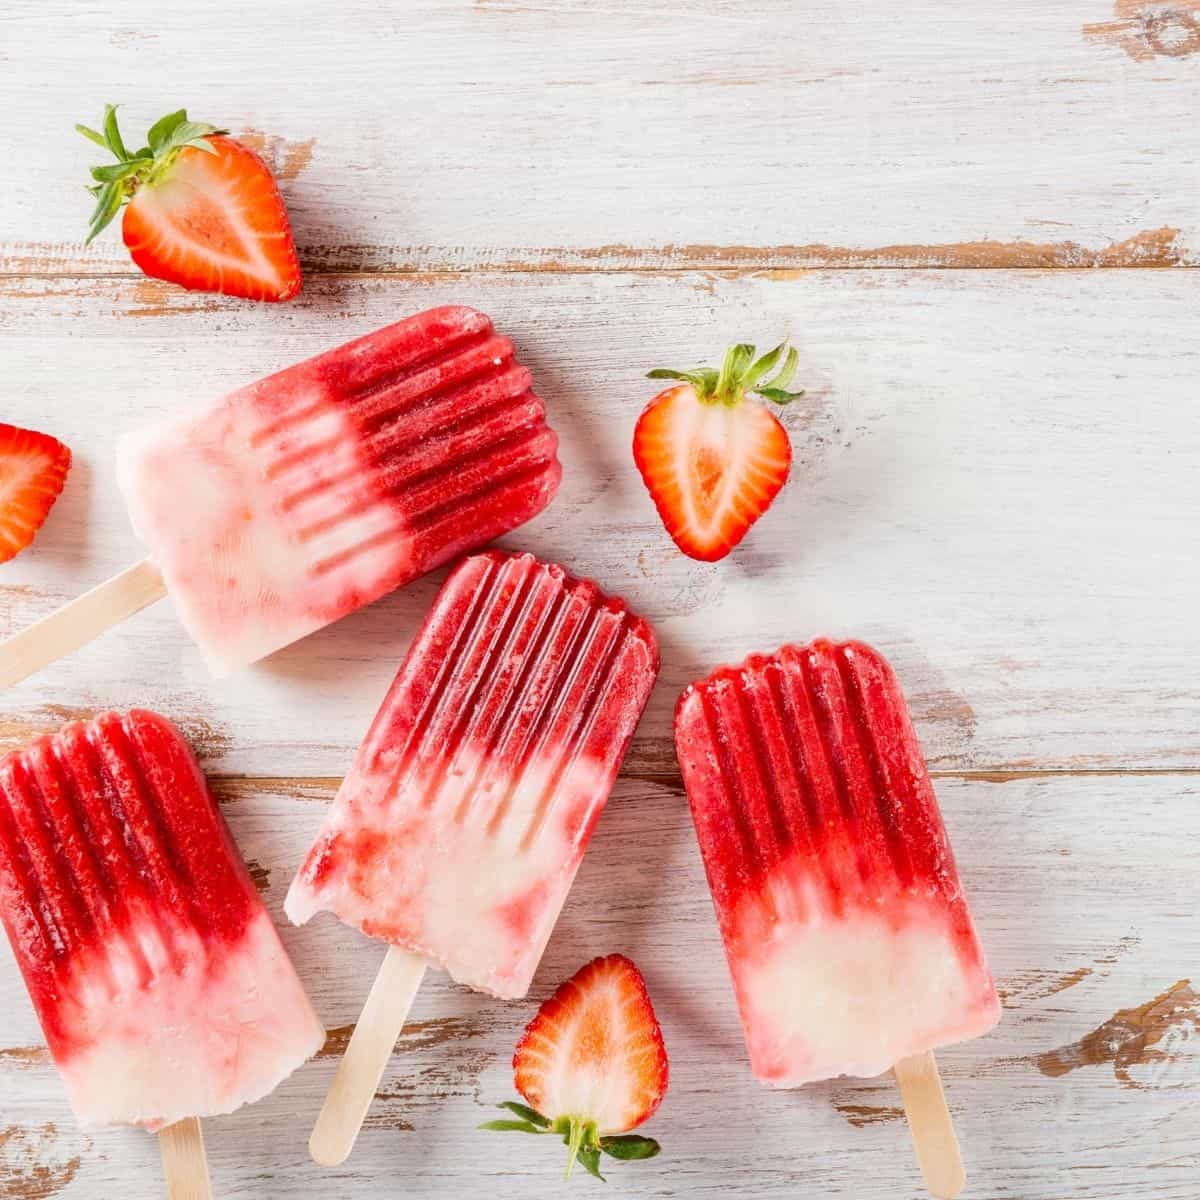 vegan strawberry popsicles are a great acne diet recipe for acne prone skin issues.